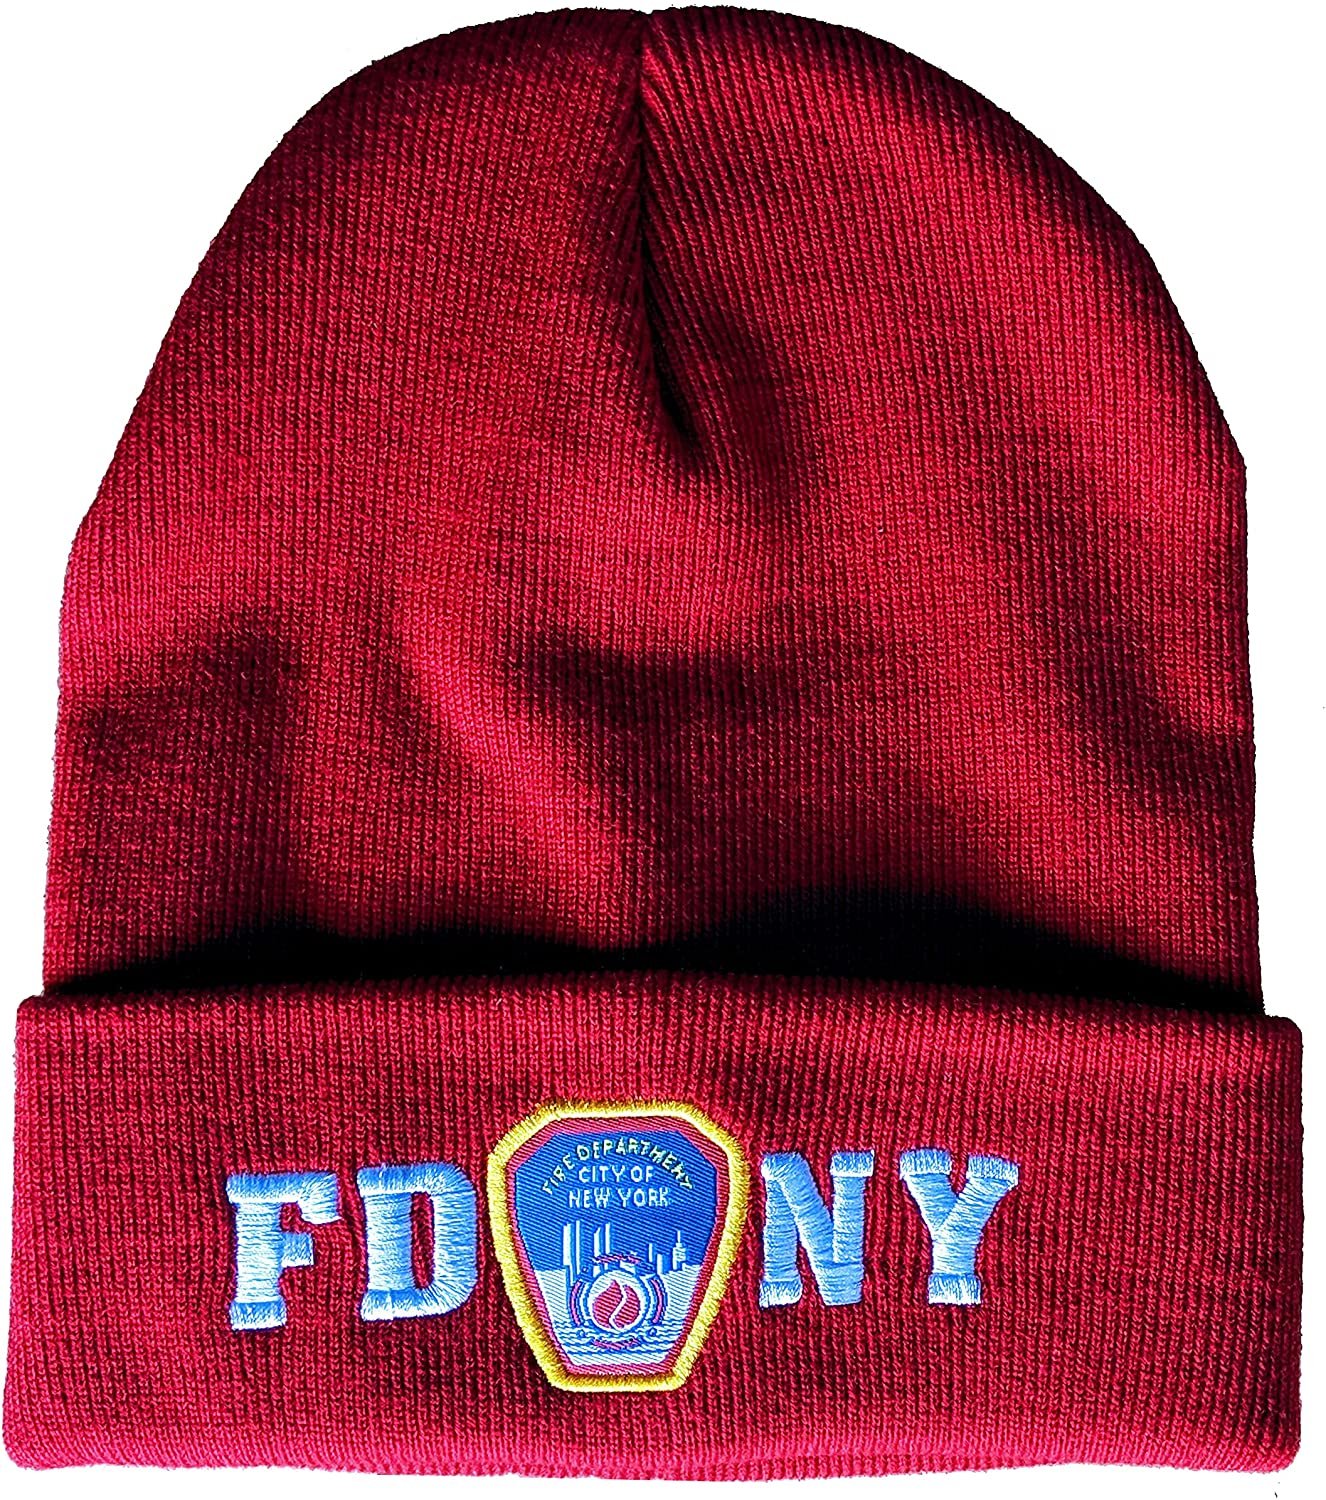 FDNY Beanies Officially Licensed Cold Weather Winter Hats – STAFF TEES